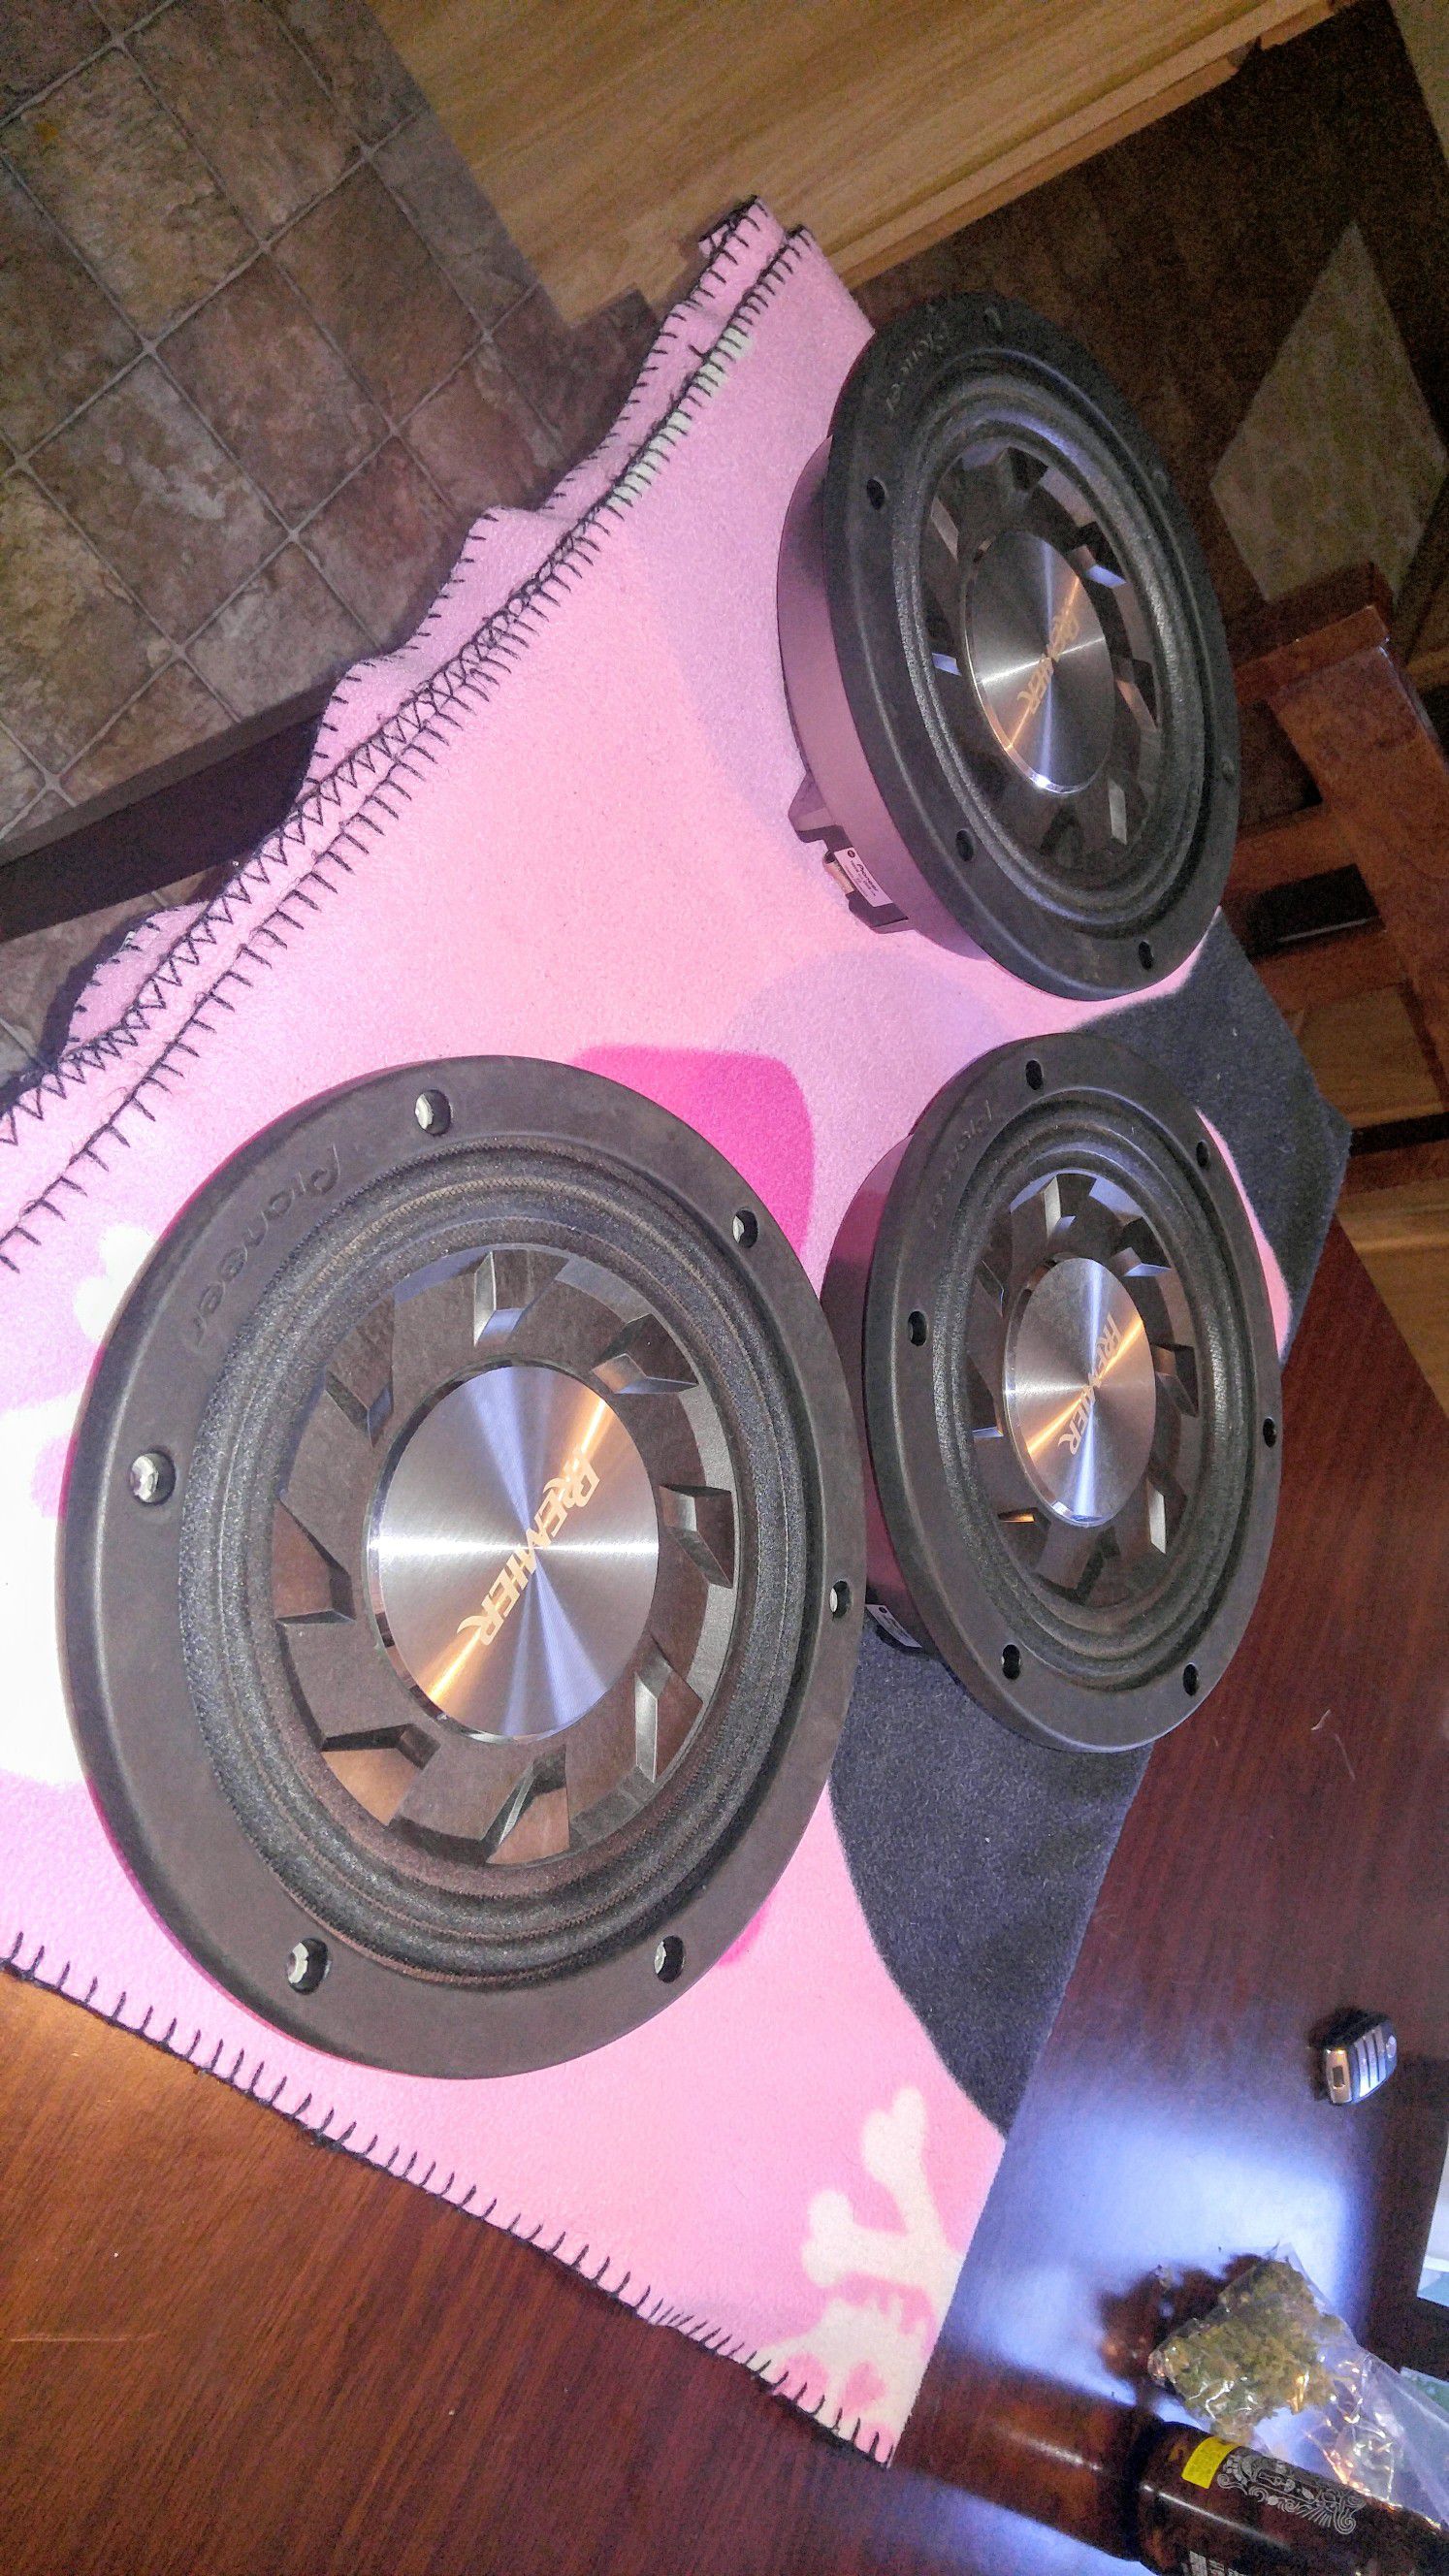 3 Pioneer Premier 10" TS-SW1041D Shallow Mount 10" Subwoofers. *NEW FIRM PRICE*